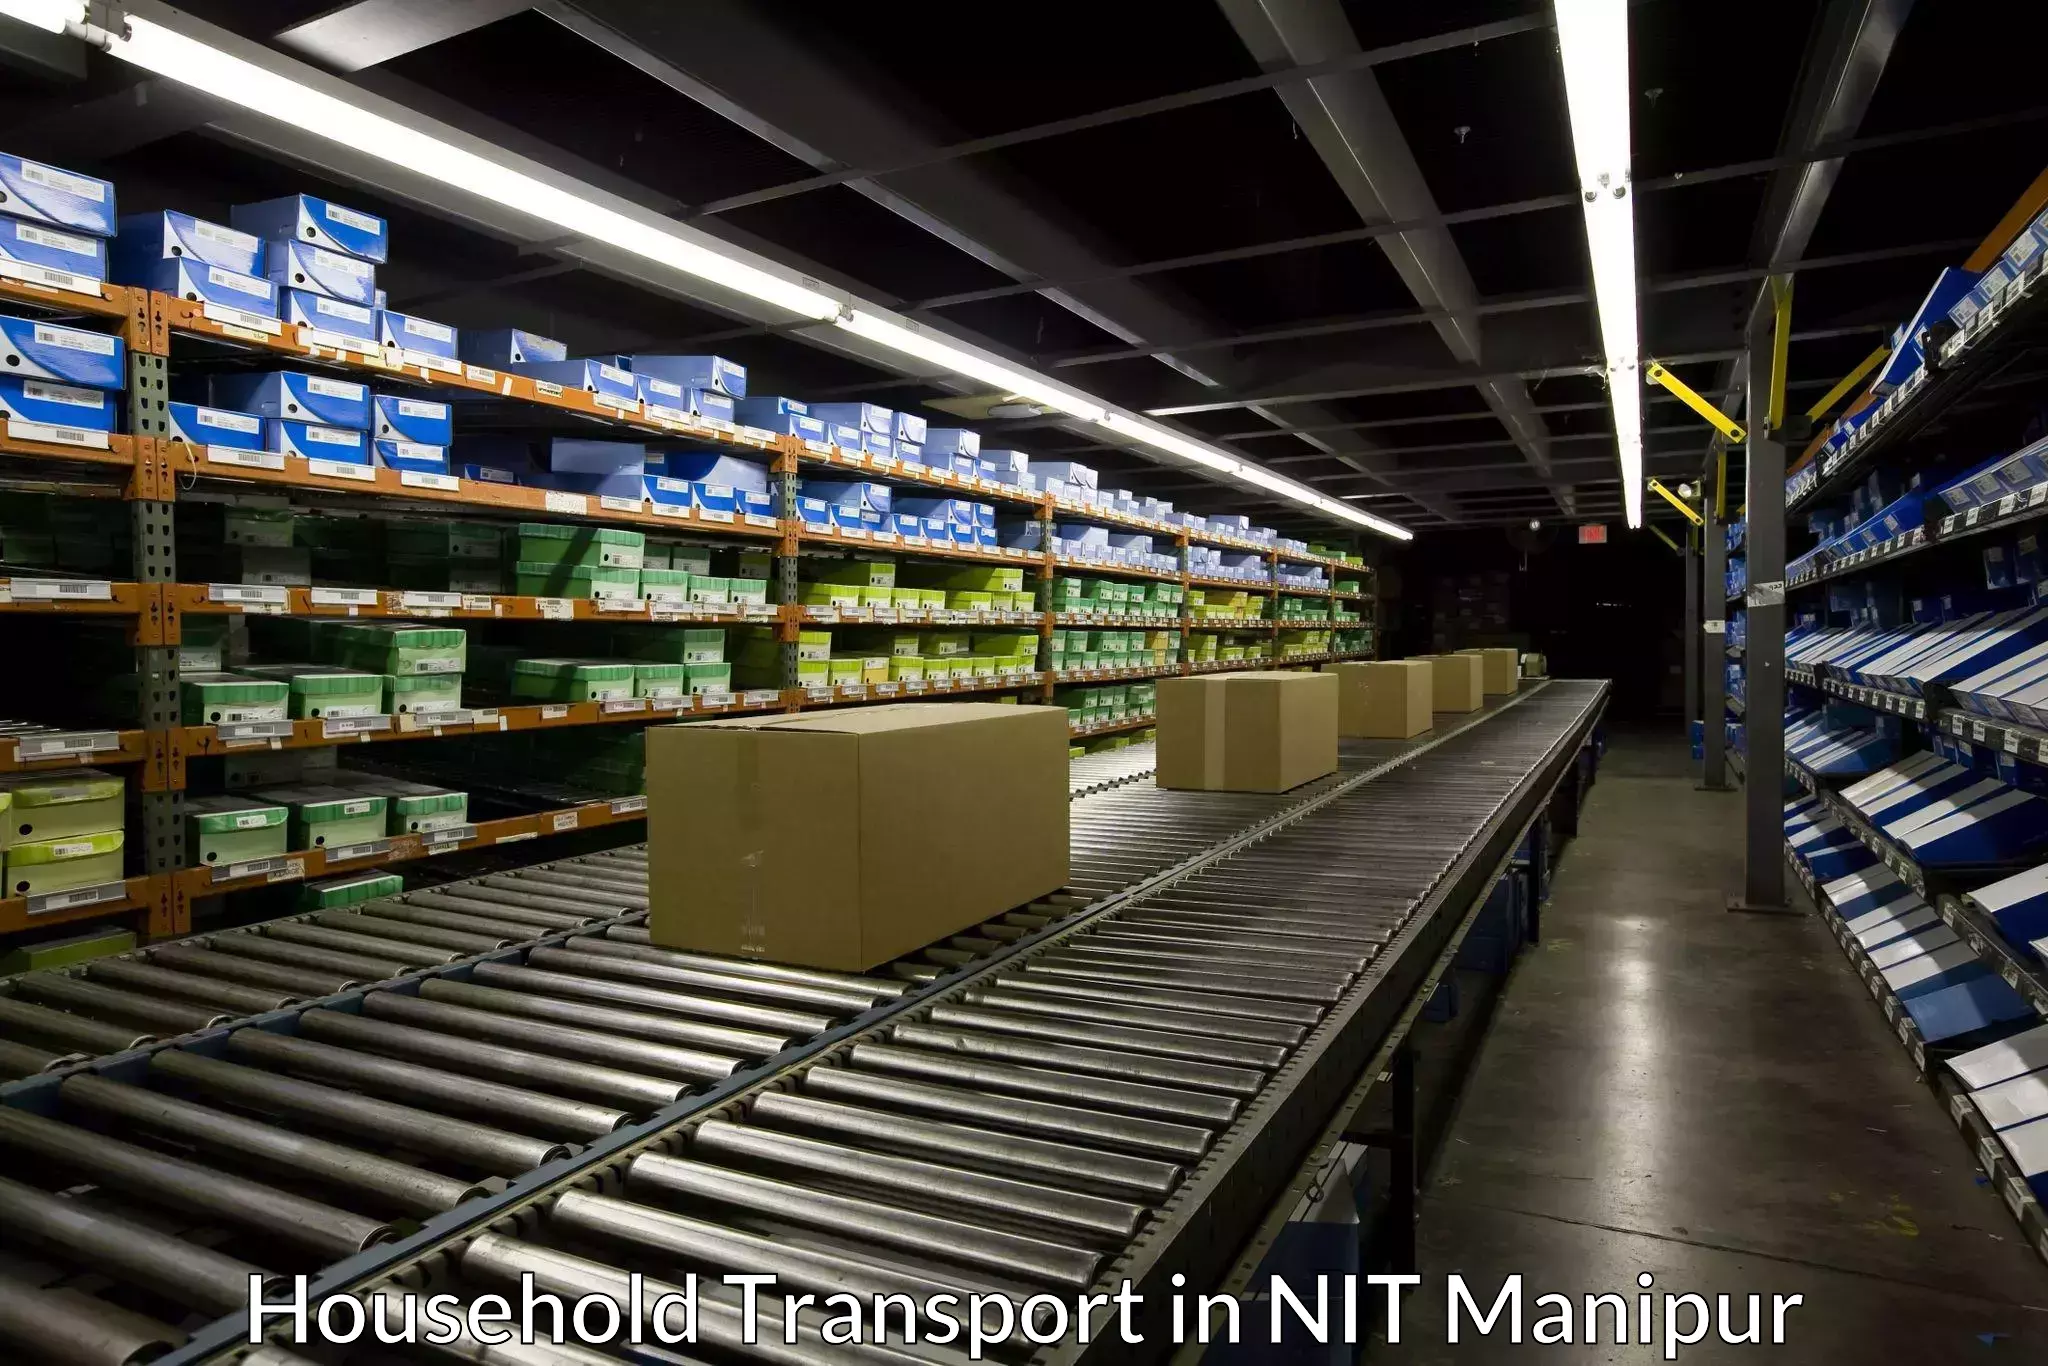 Reliable goods transport in NIT Manipur